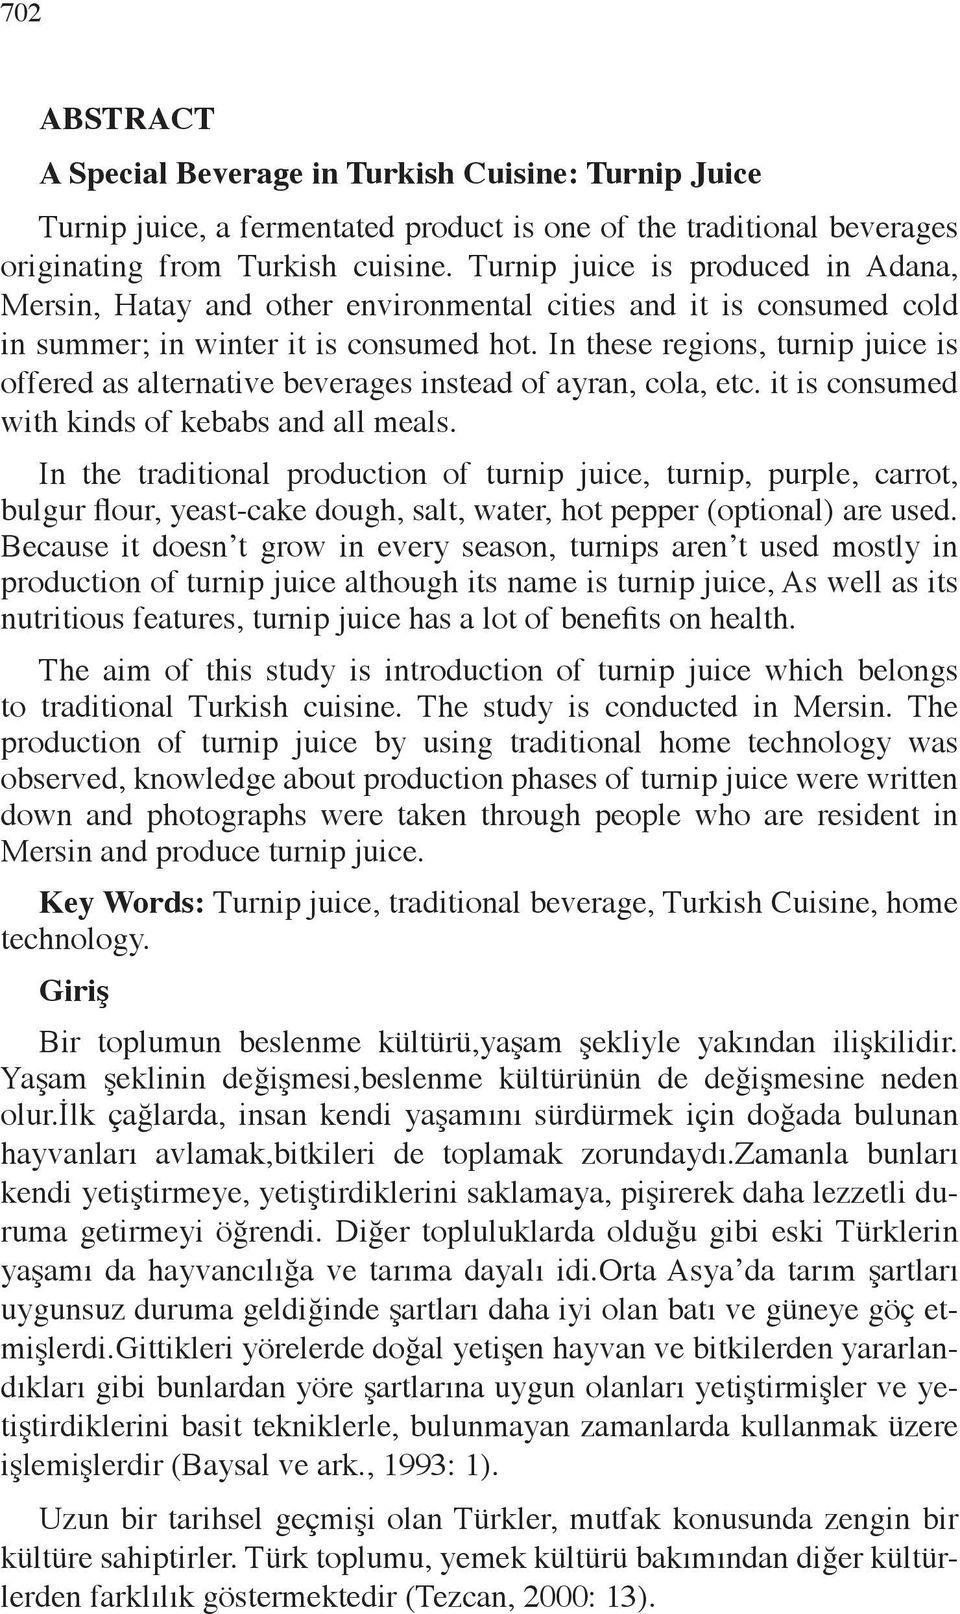 In these regions, turnip juice is offered as alternative beverages instead of ayran, cola, etc. it is consumed with kinds of kebabs and all meals.